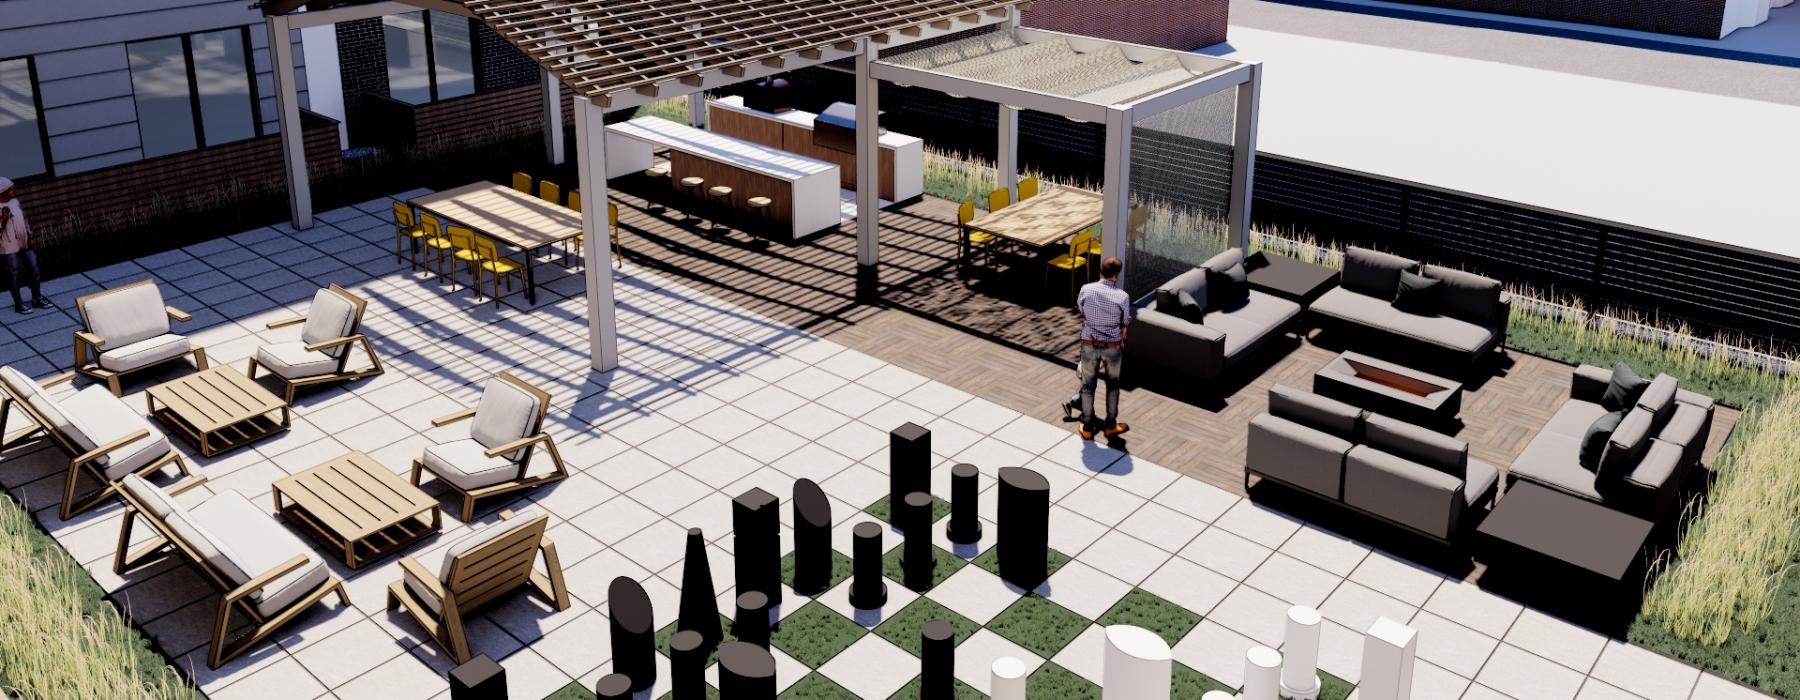 aerial view of life-sized chess board on rooftop lounge